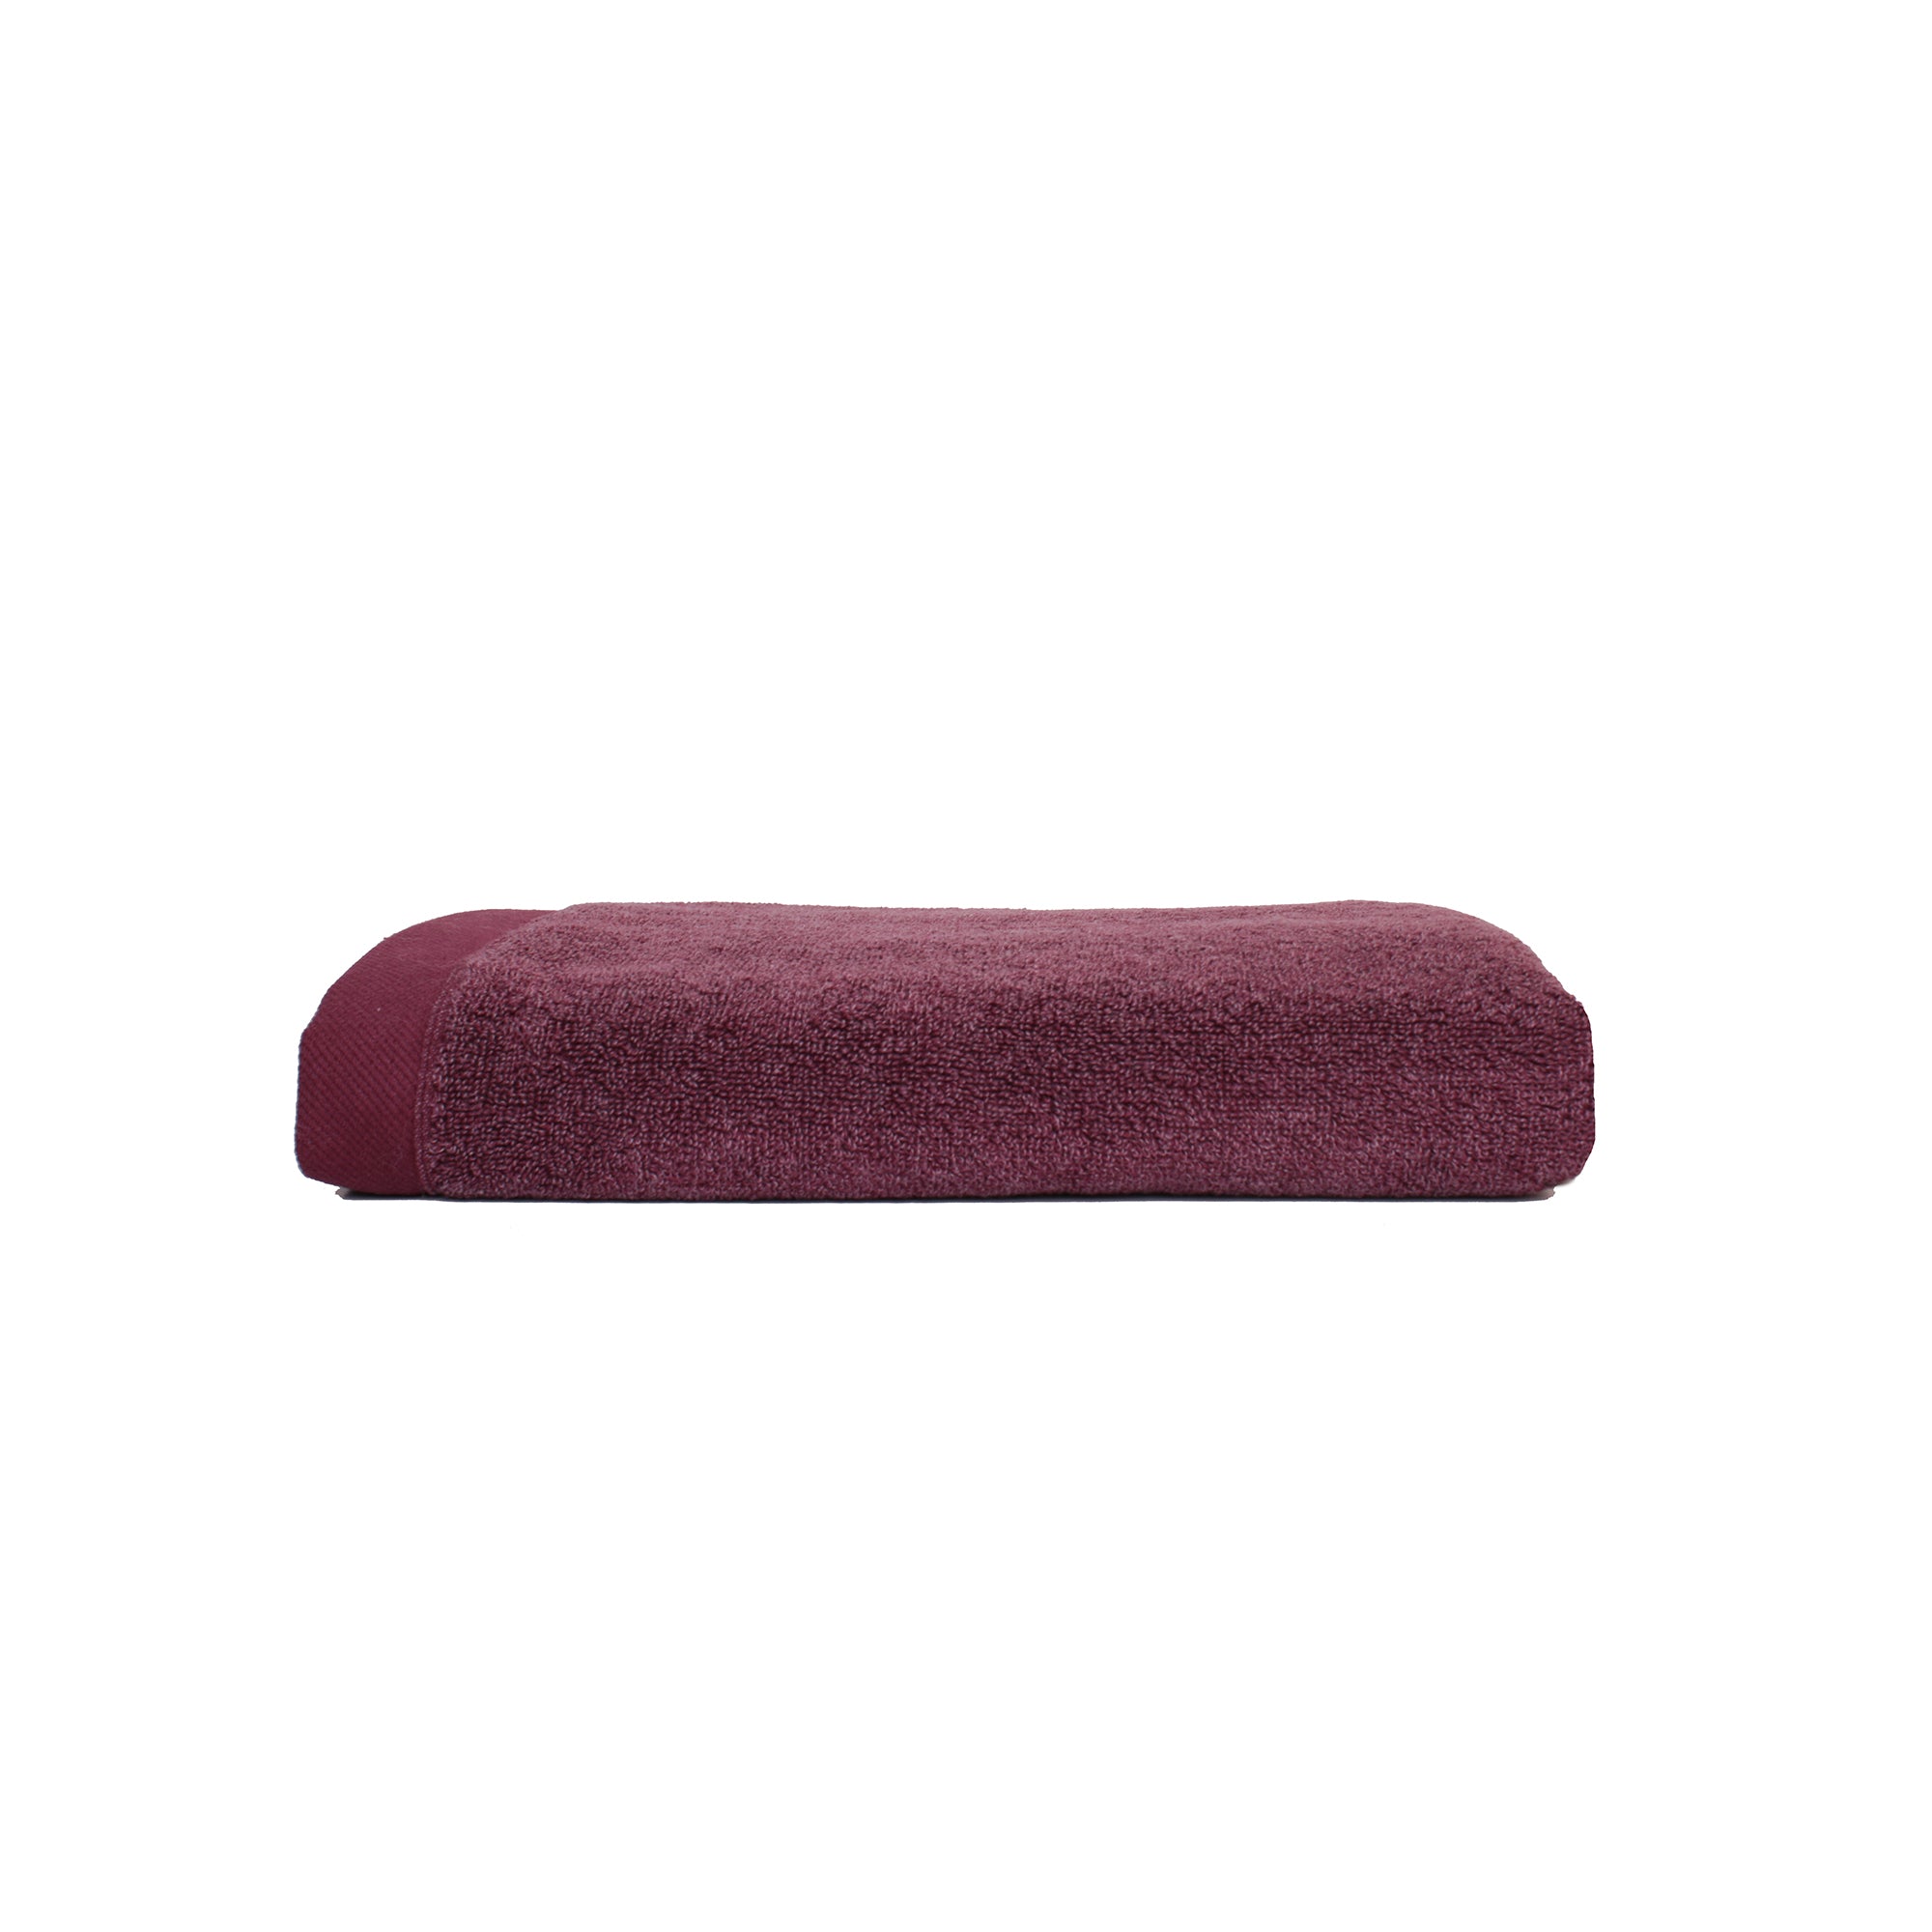 Bath Sheet Abode Eco by Drift Home in Claret